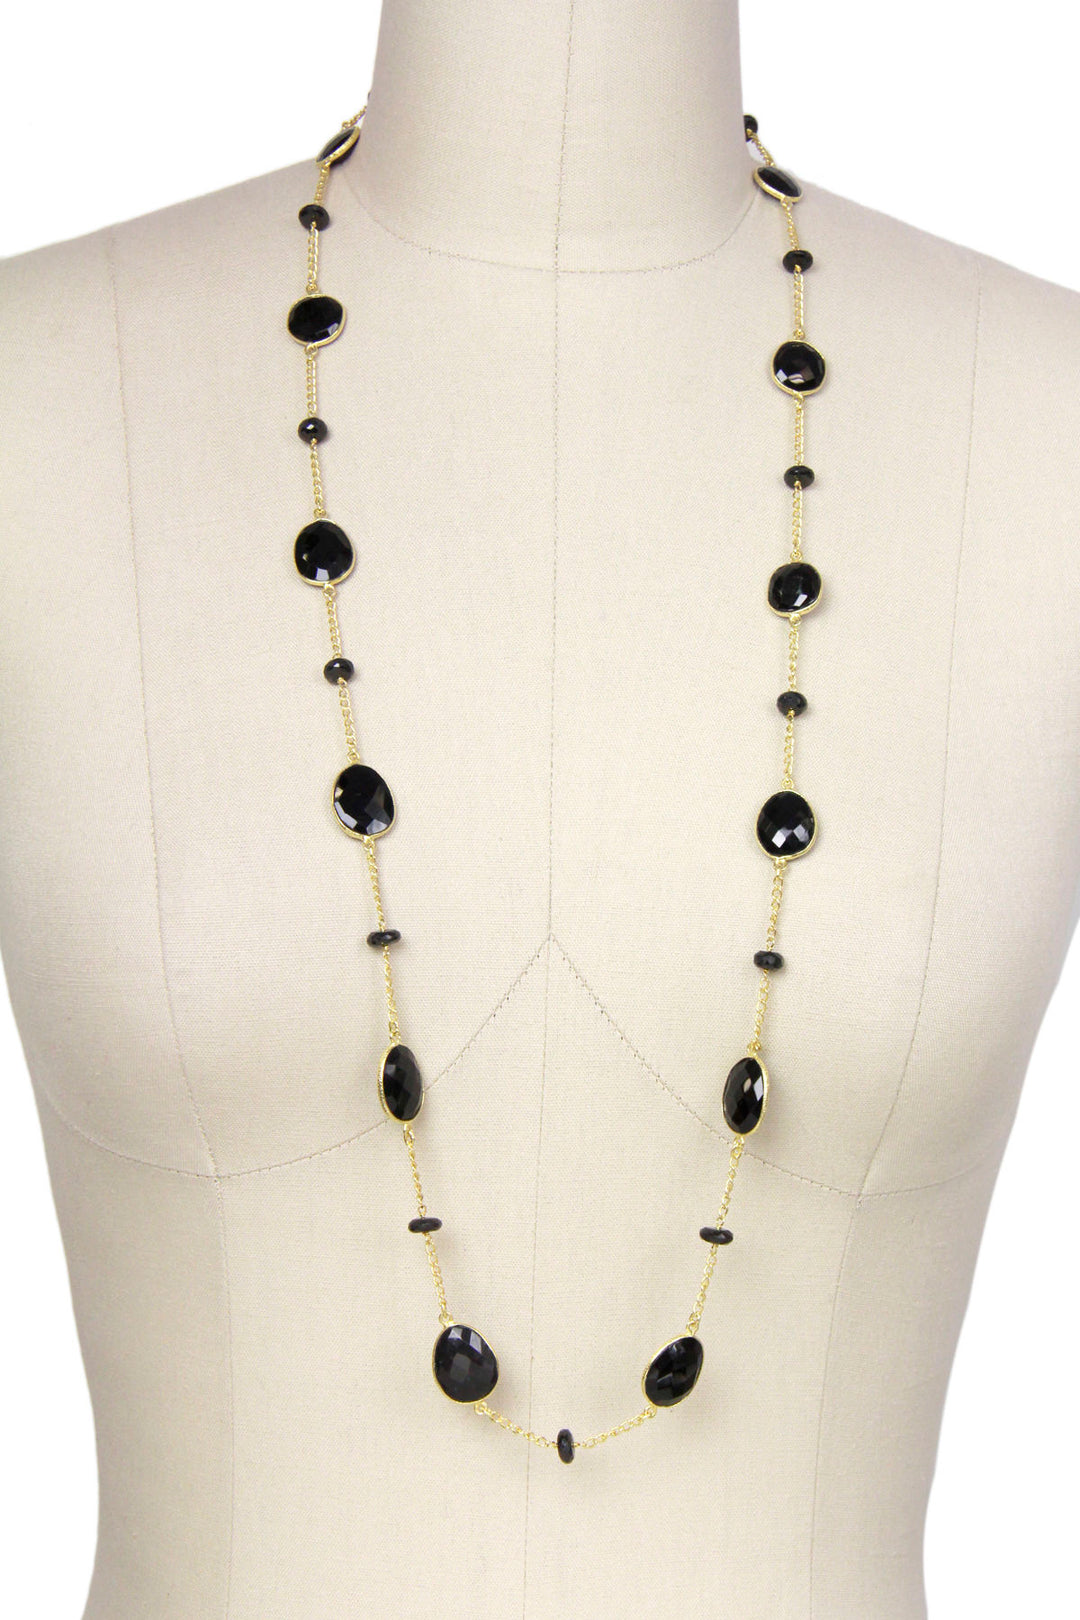 Black Onyx Stone and Bead Necklace